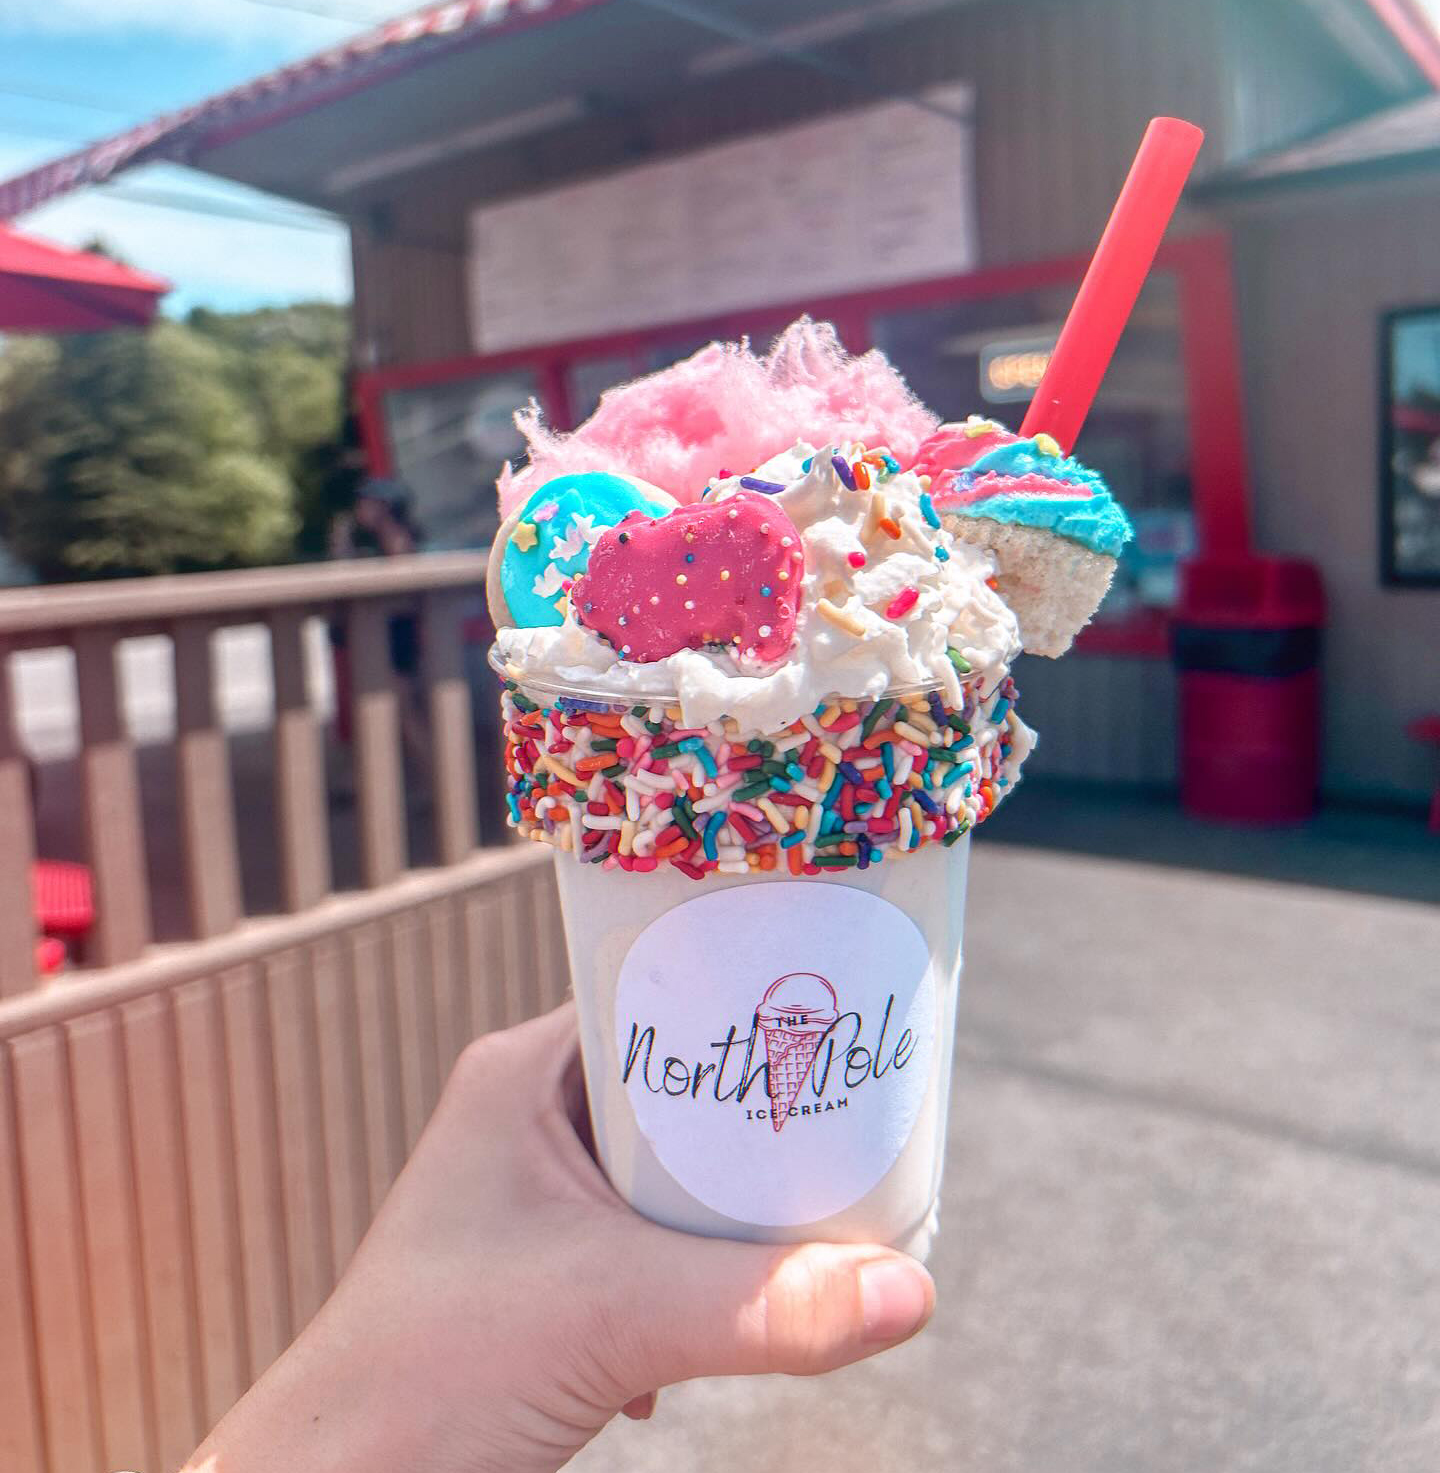 Milkshake with rainbow sprinkles around the edge, pink animal crackers and cotton candy and cake.